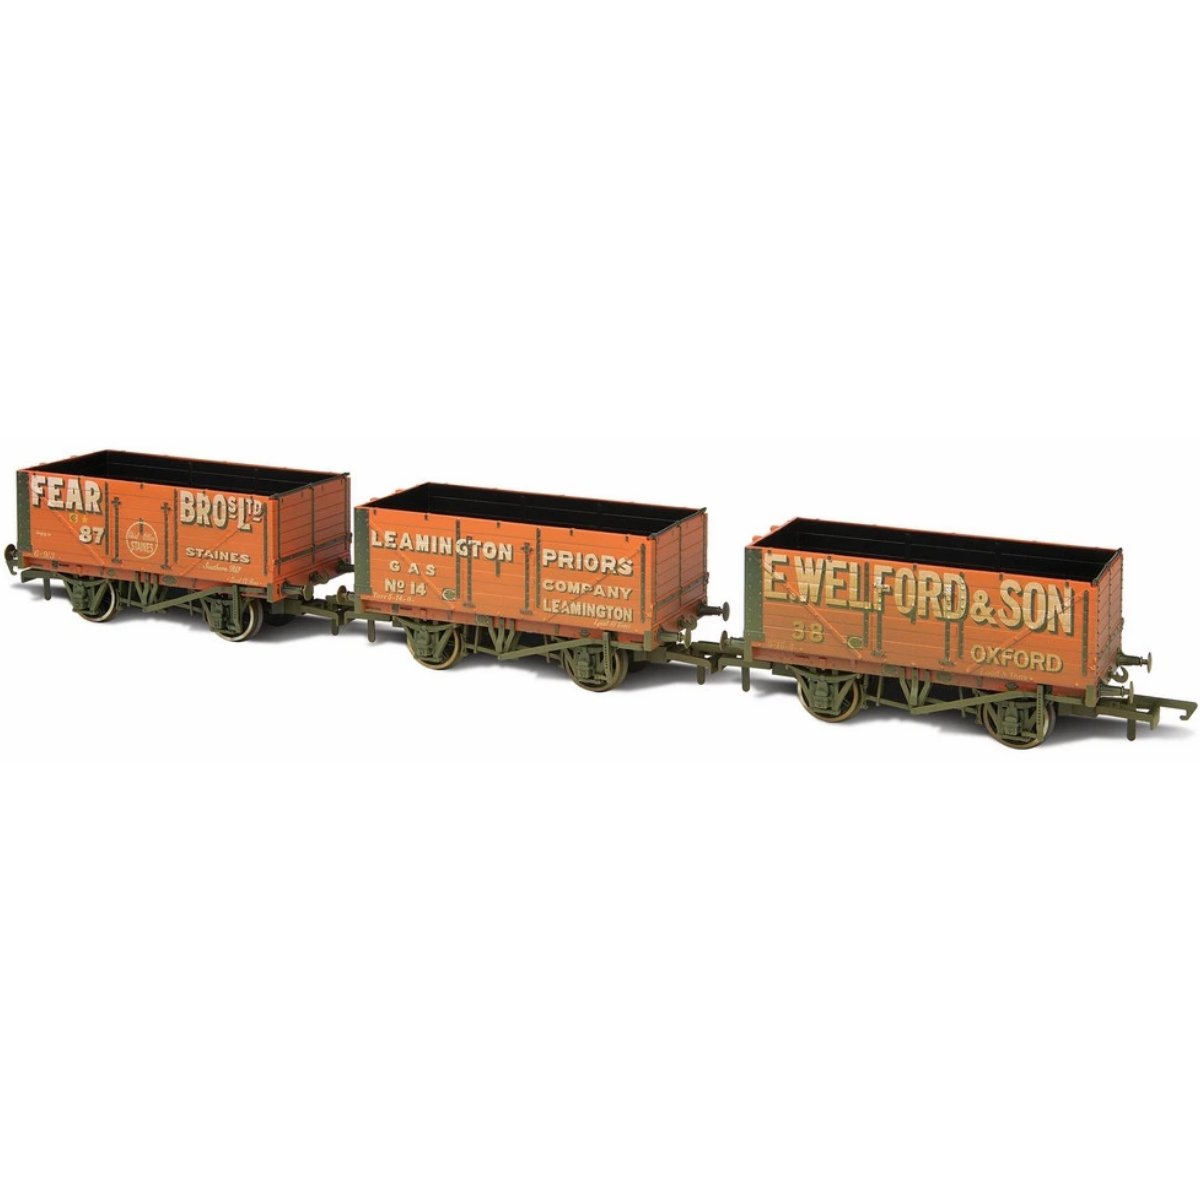 Oxford Rail Triple Pack of Weathered 7 Plank Wagons - Fear Bros, Leamington, Welford - Phillips Hobbies